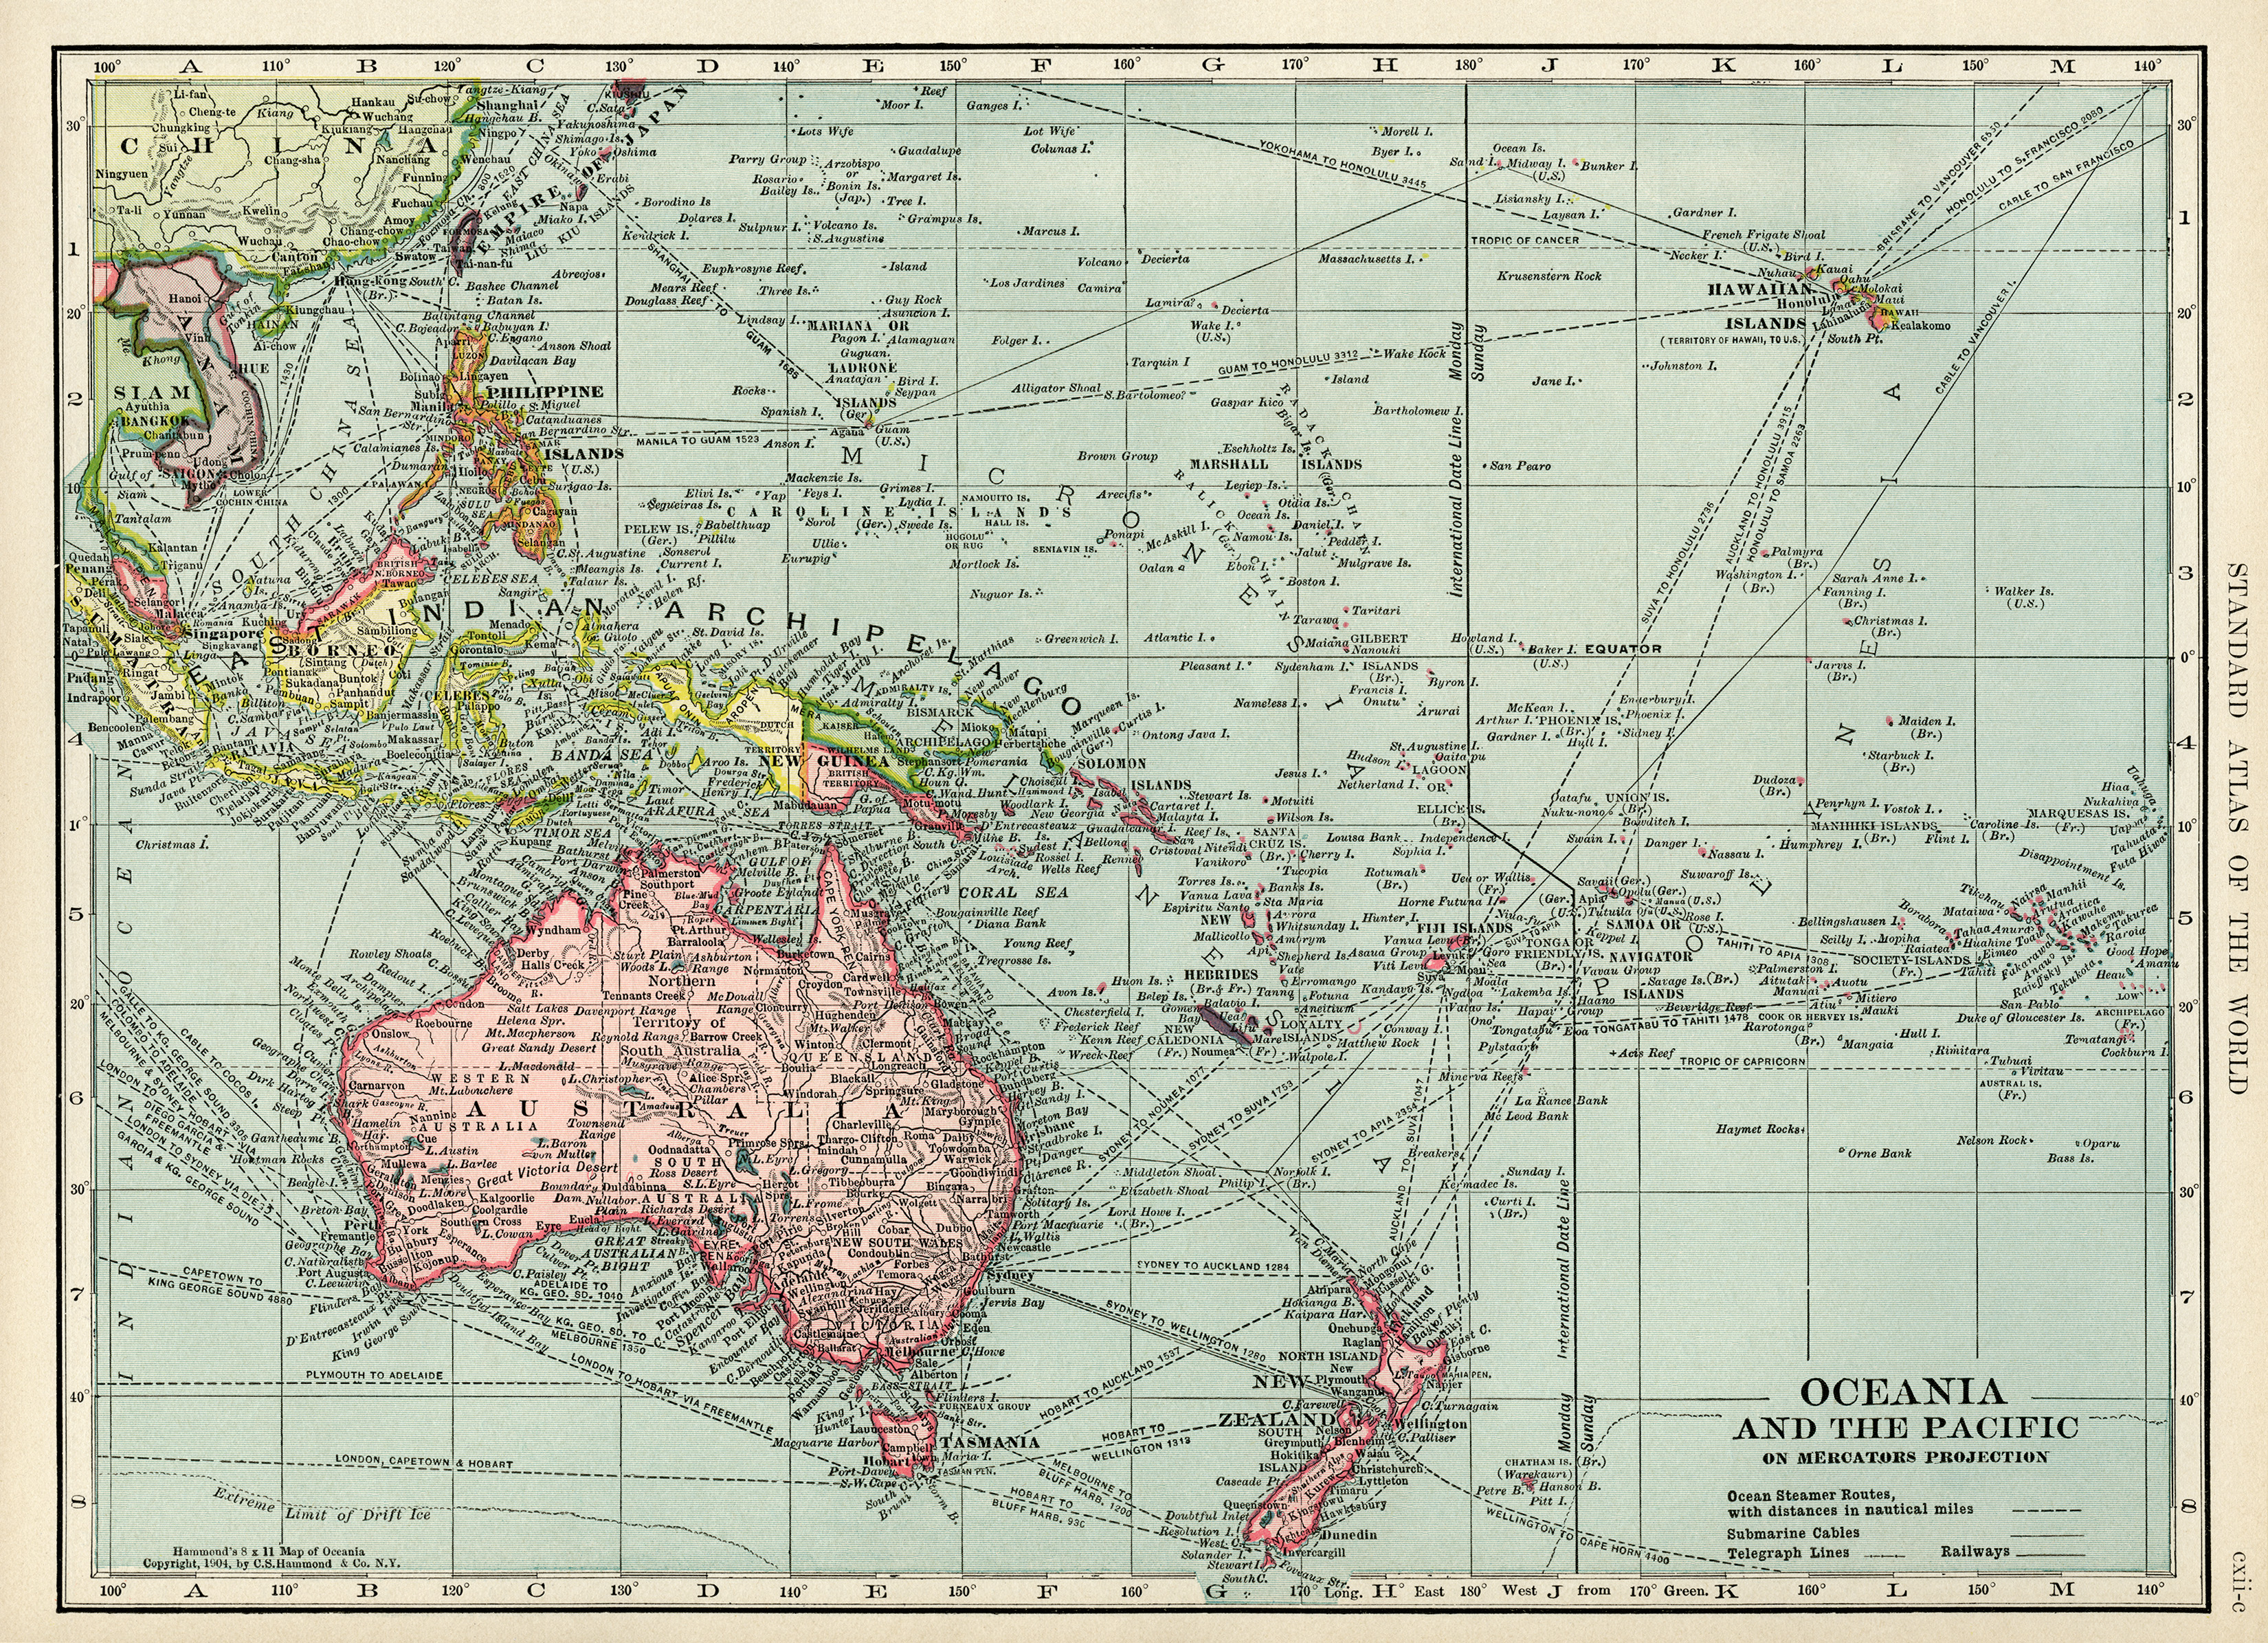 Oceania and Pacific map, vintage map download, antique map, C. S. Hammond, map of ocean and islands